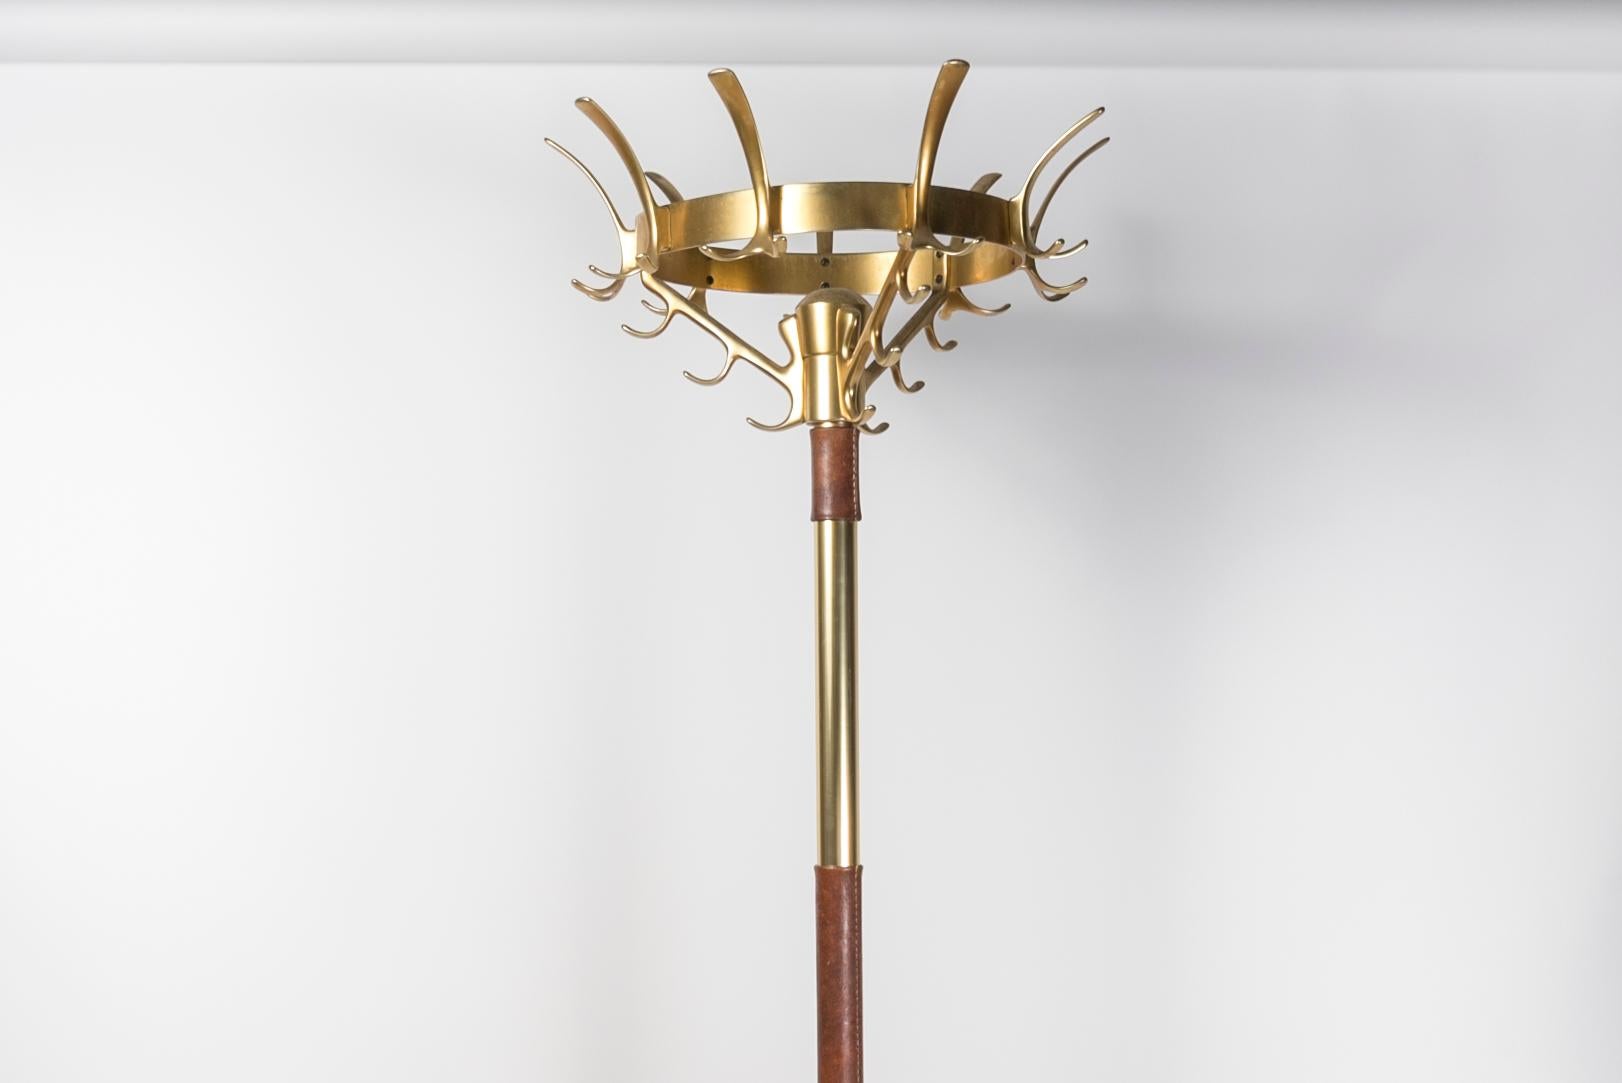 1950's brass and stitched leather coat stand by jacques Adnet.

